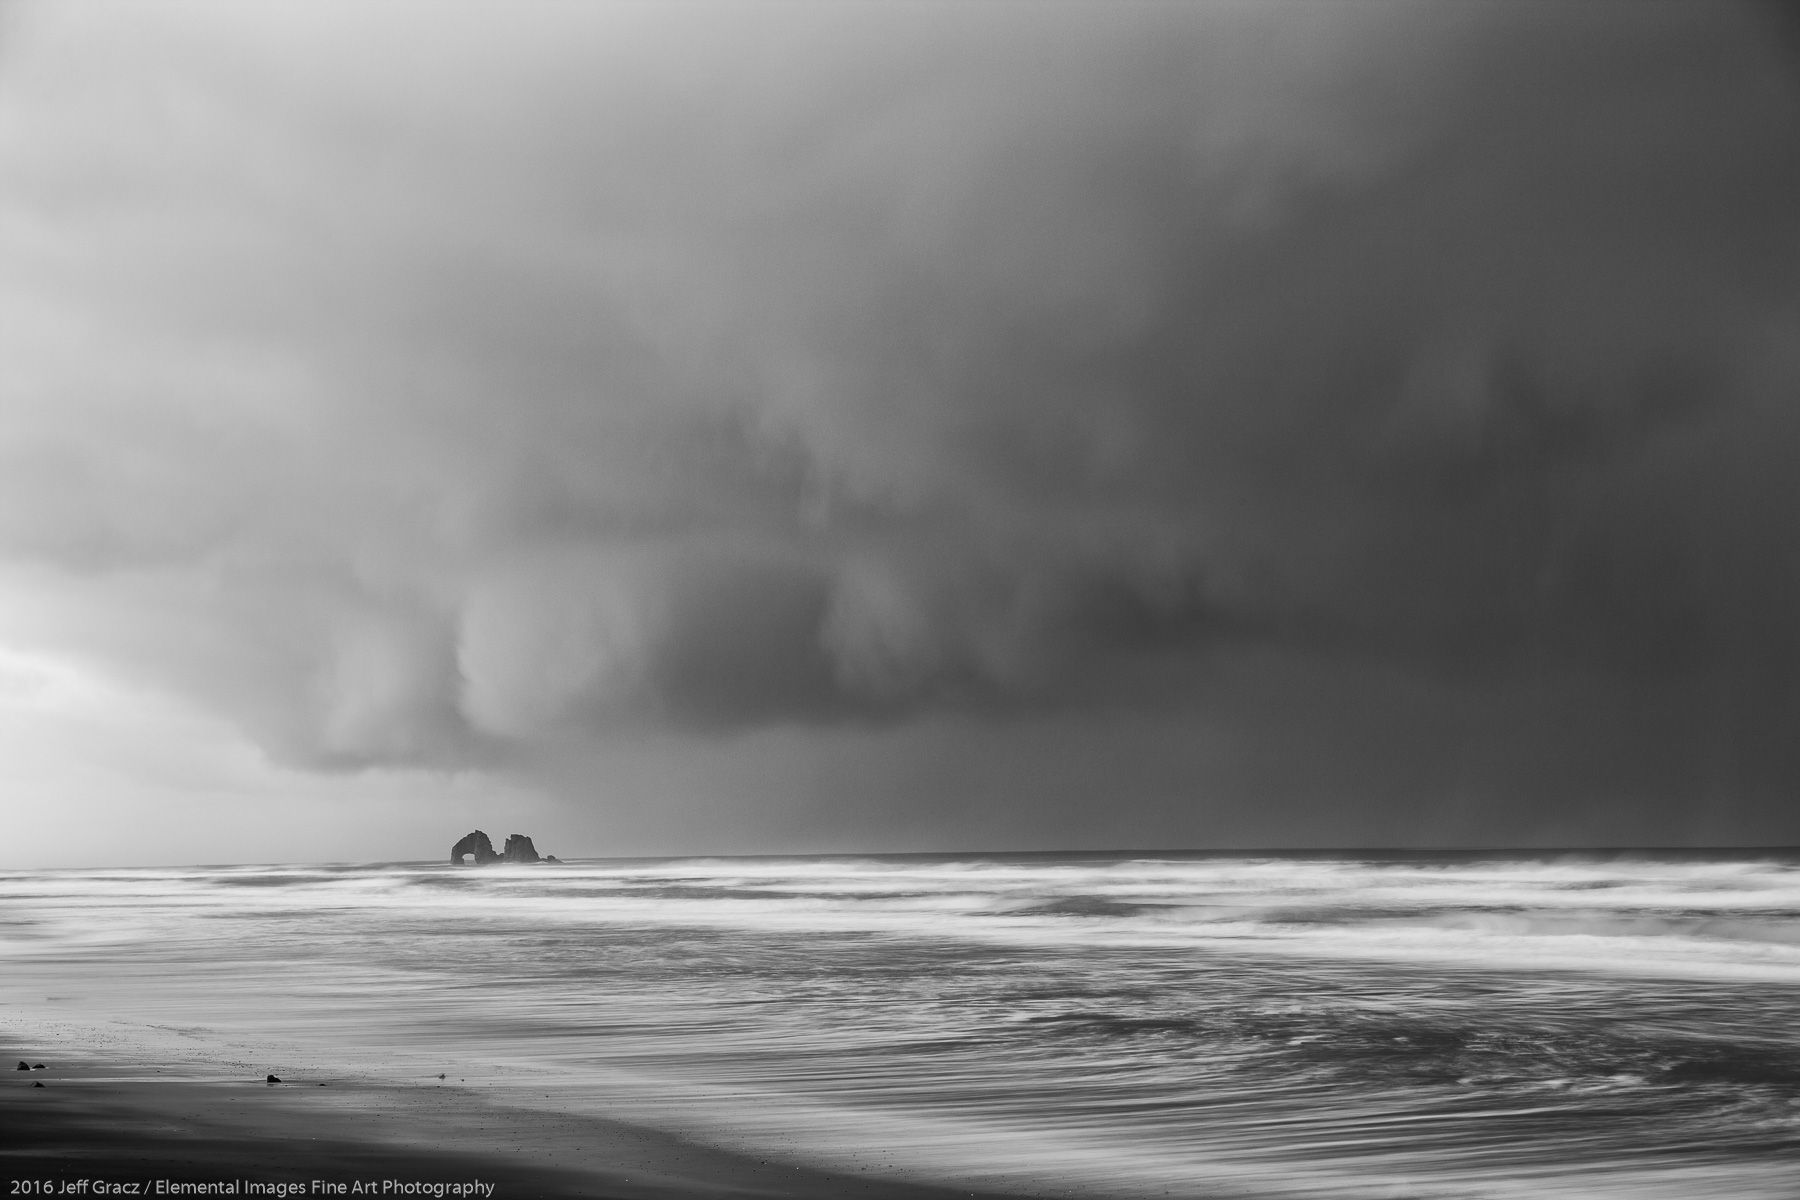 Twin Rocks, incoming squall | Rockaway Beach | OR | USA - © 2016 Jeff Gracz / Elemental Images Fine Art Photography - All Rights Reserved Worldwide